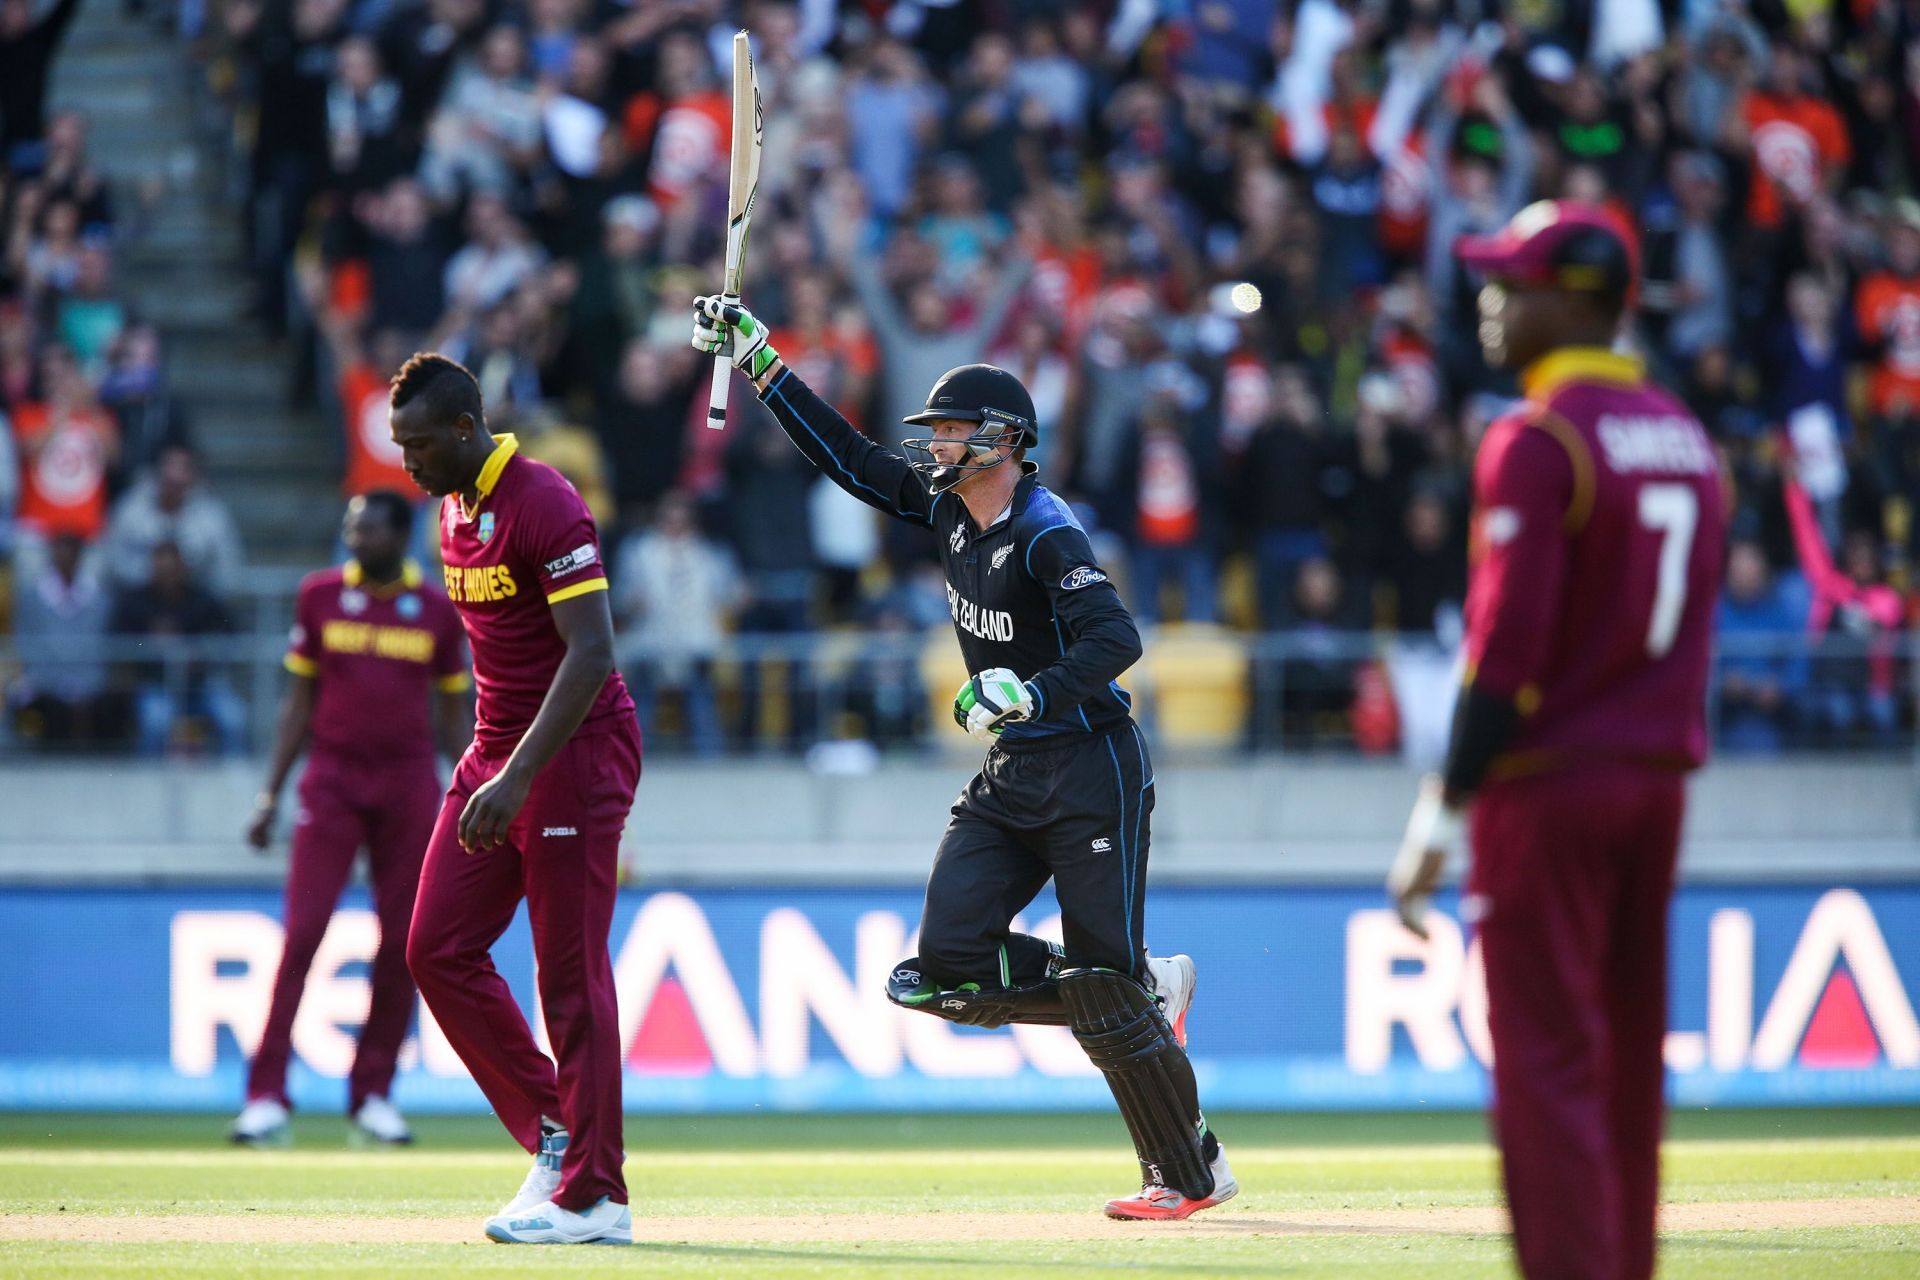 The Kiwi batter celebrates his double ton against West Indies in the 2015 World Cup. (Pic: Getty Images)